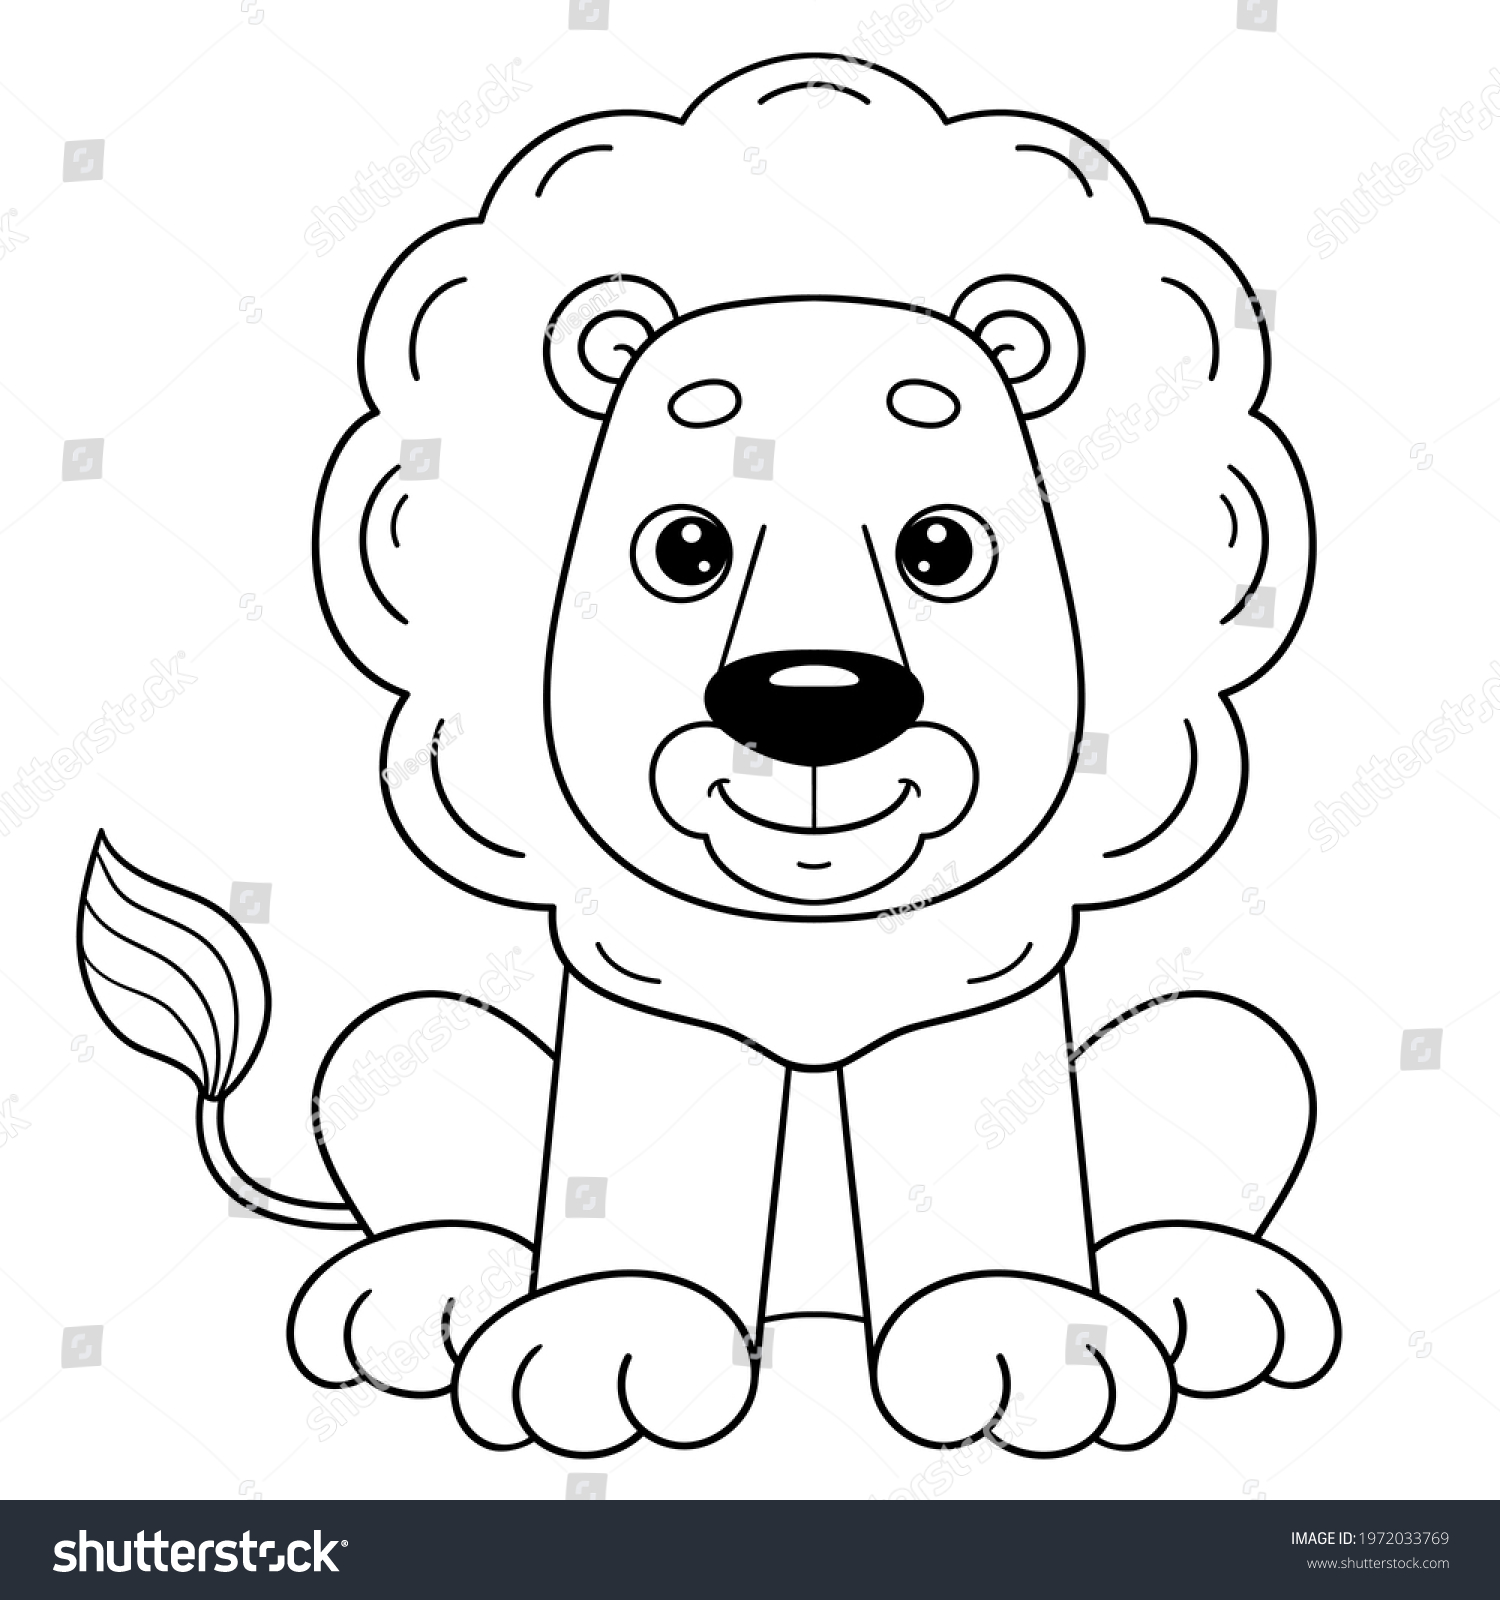 Coloring Page Outline Cartoon Cute Lion Stock Vector (Royalty Free ...